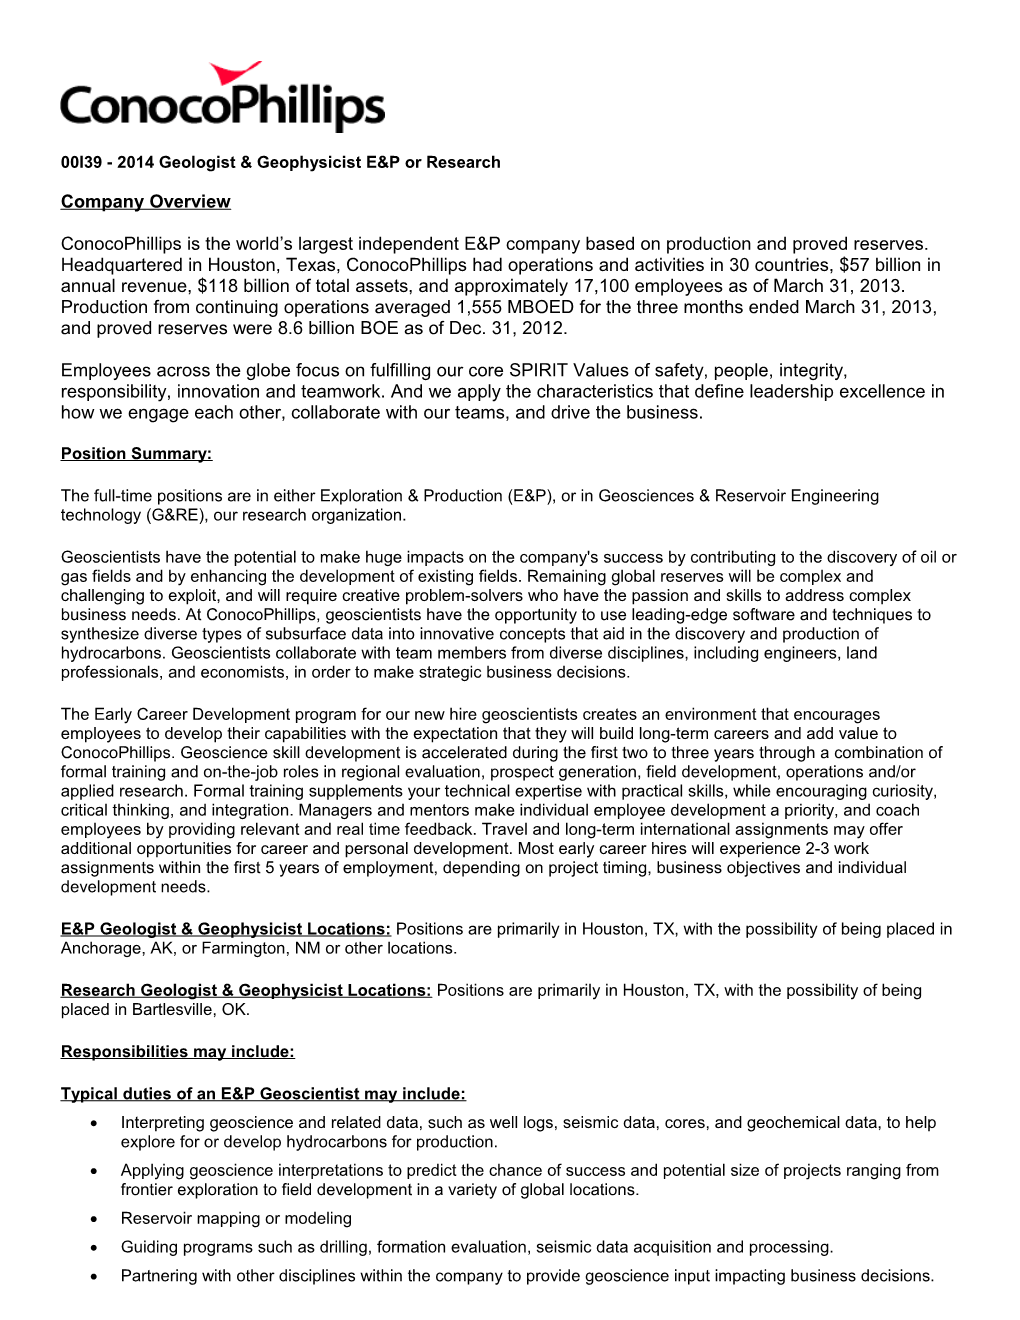 00I39 - 2014 Geologist & Geophysicist E&P Or Research